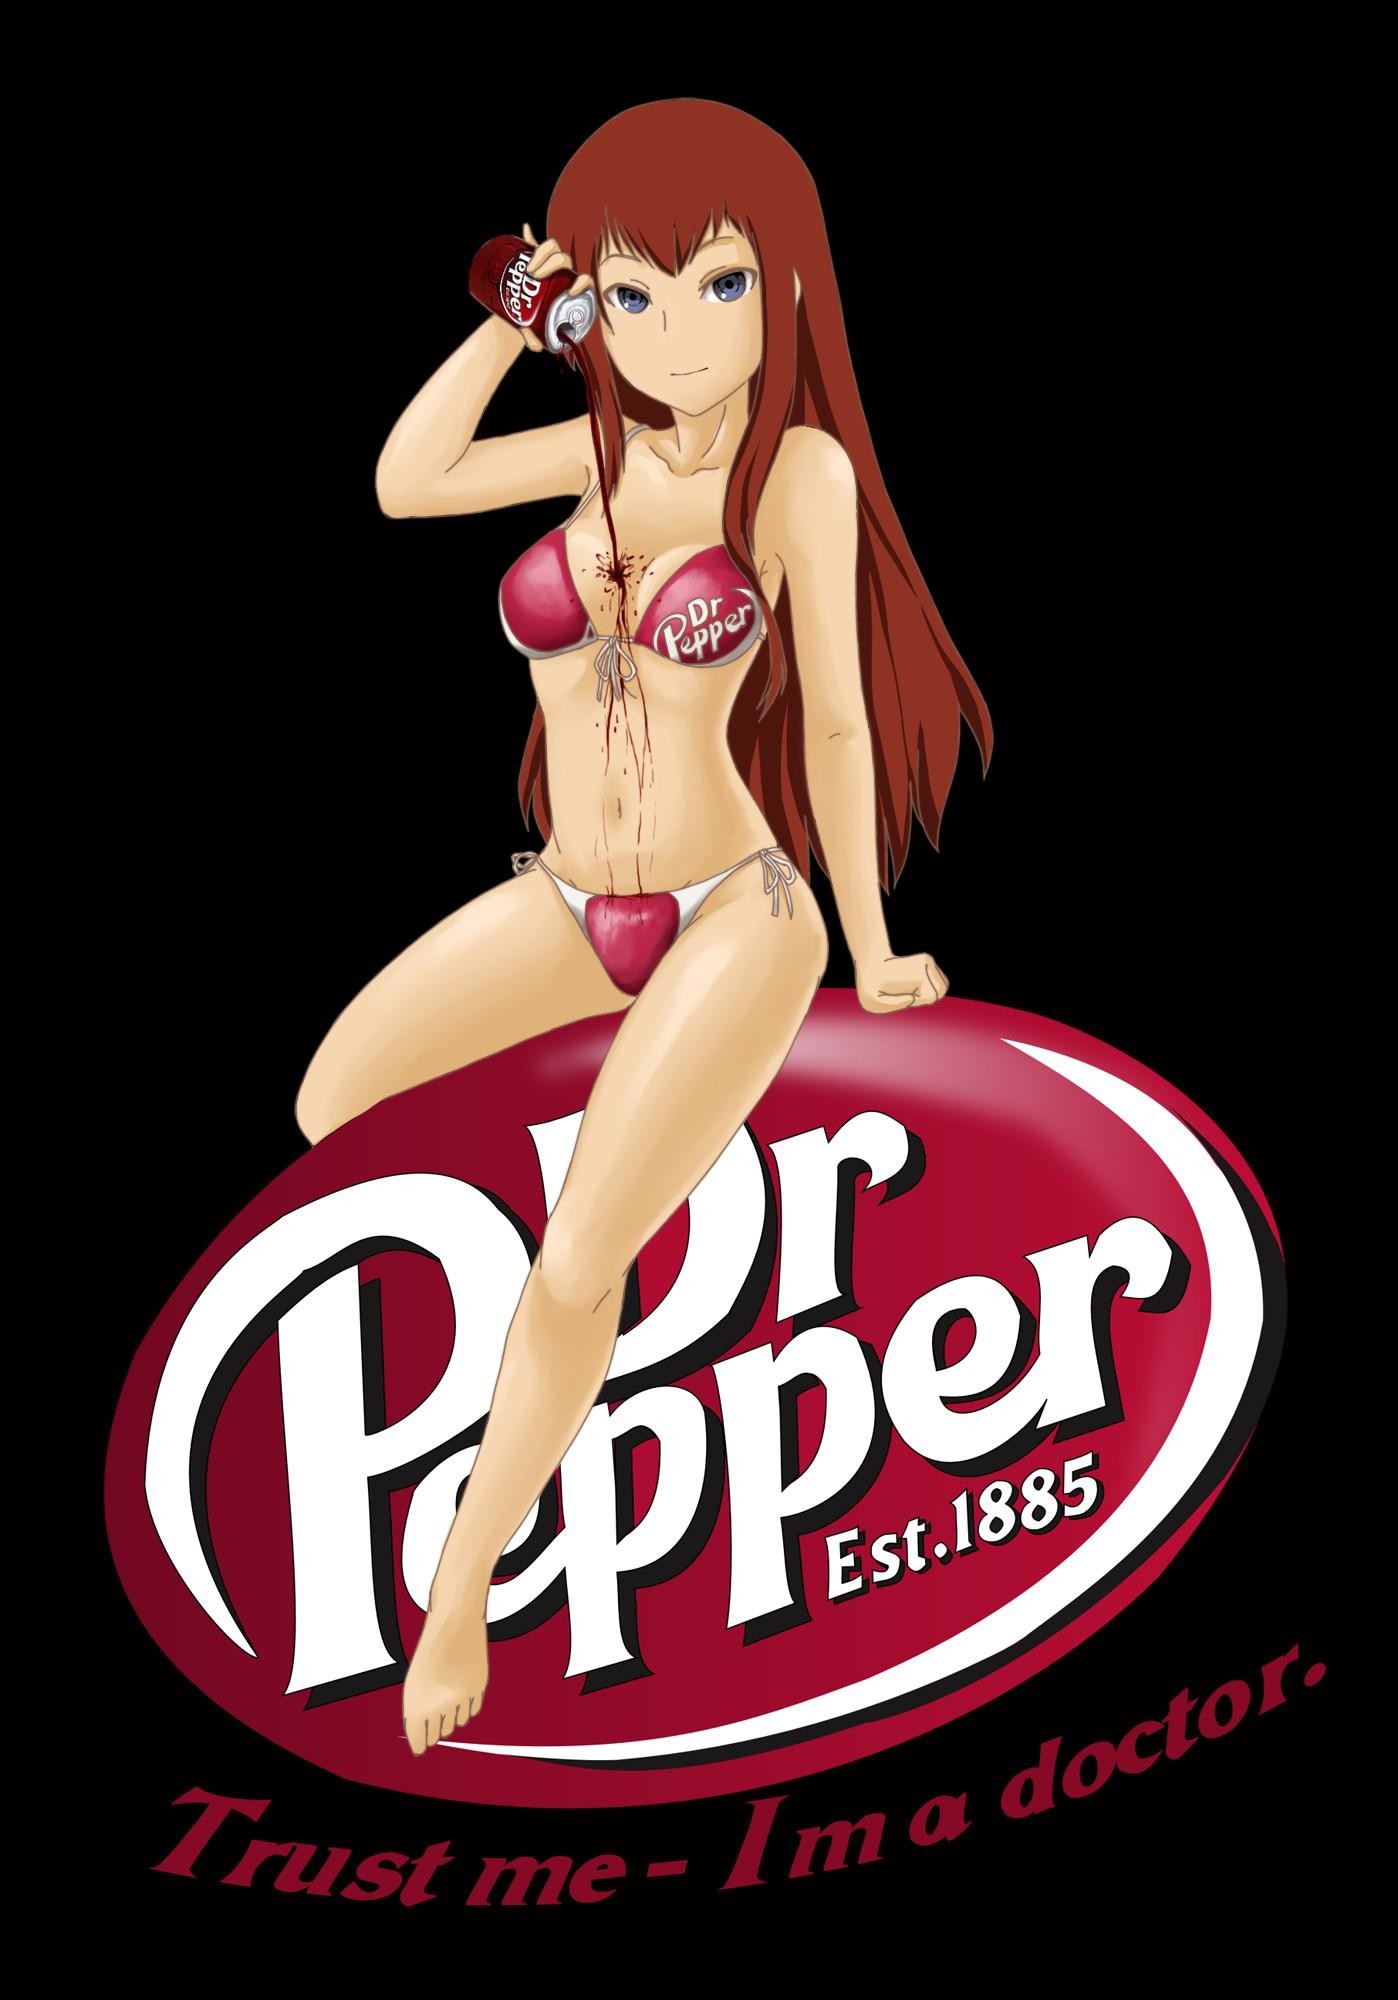 Dr Pepper Photos Download The BEST Free Dr Pepper Stock Photos  HD Images